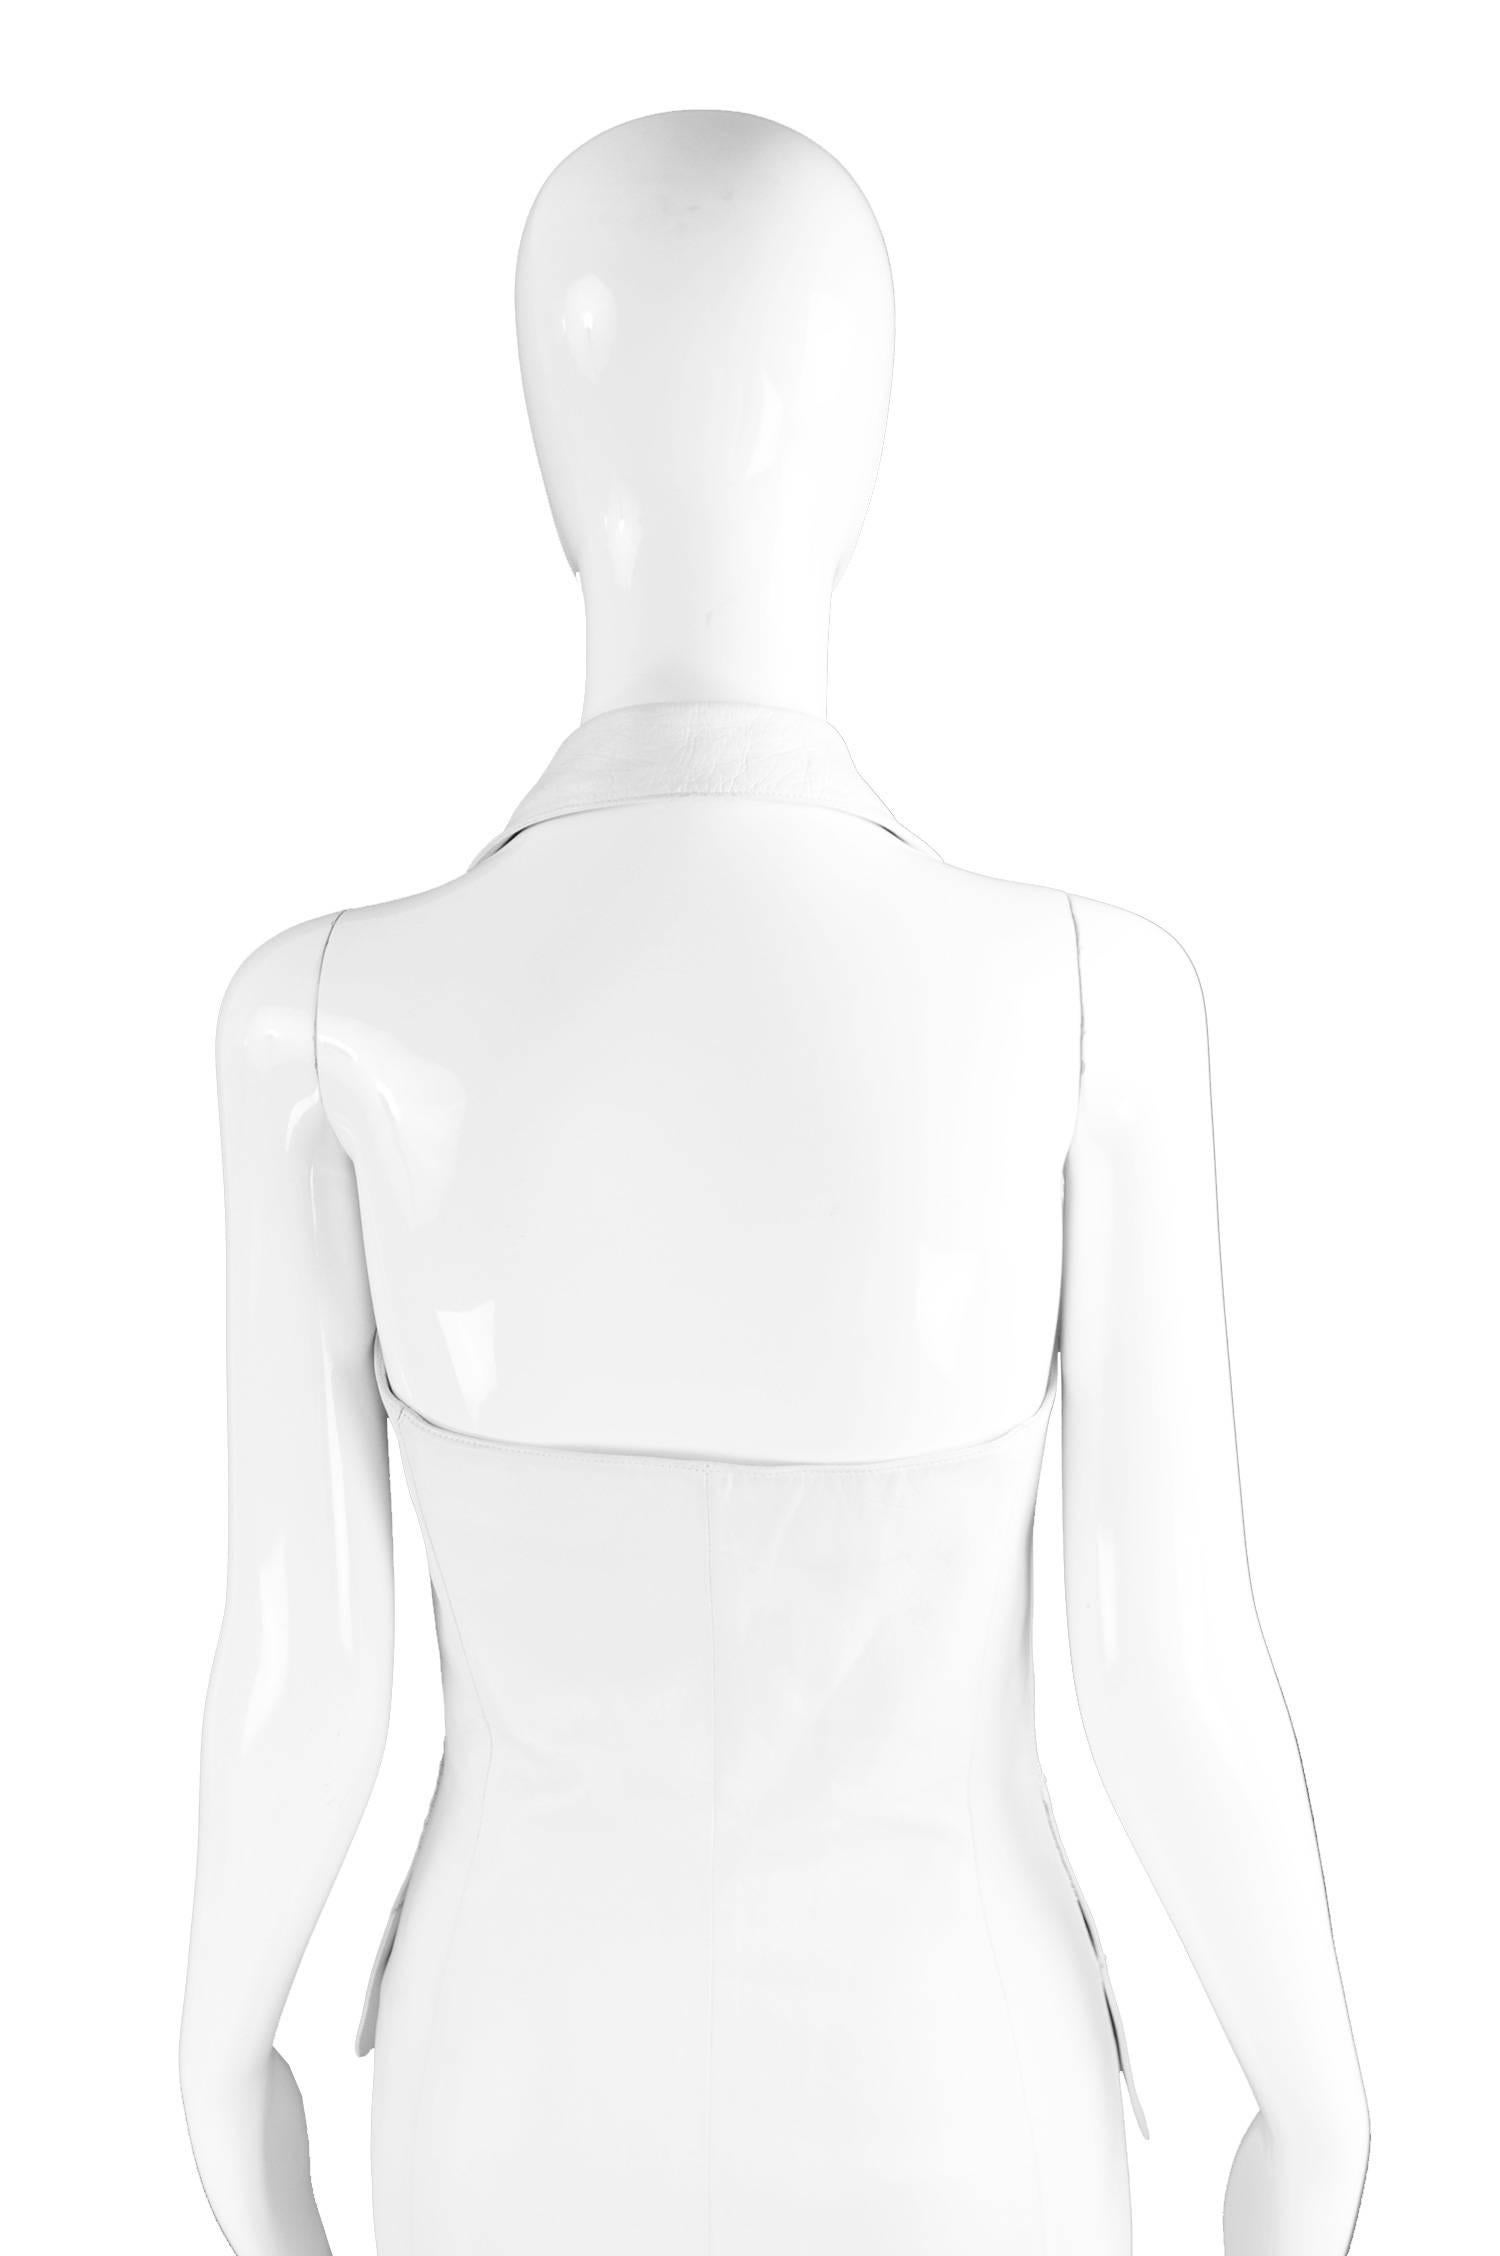 Women's Alexander McQueen for Givenchy Couture 'Cowgirls' White Leather Dress, SS 1998